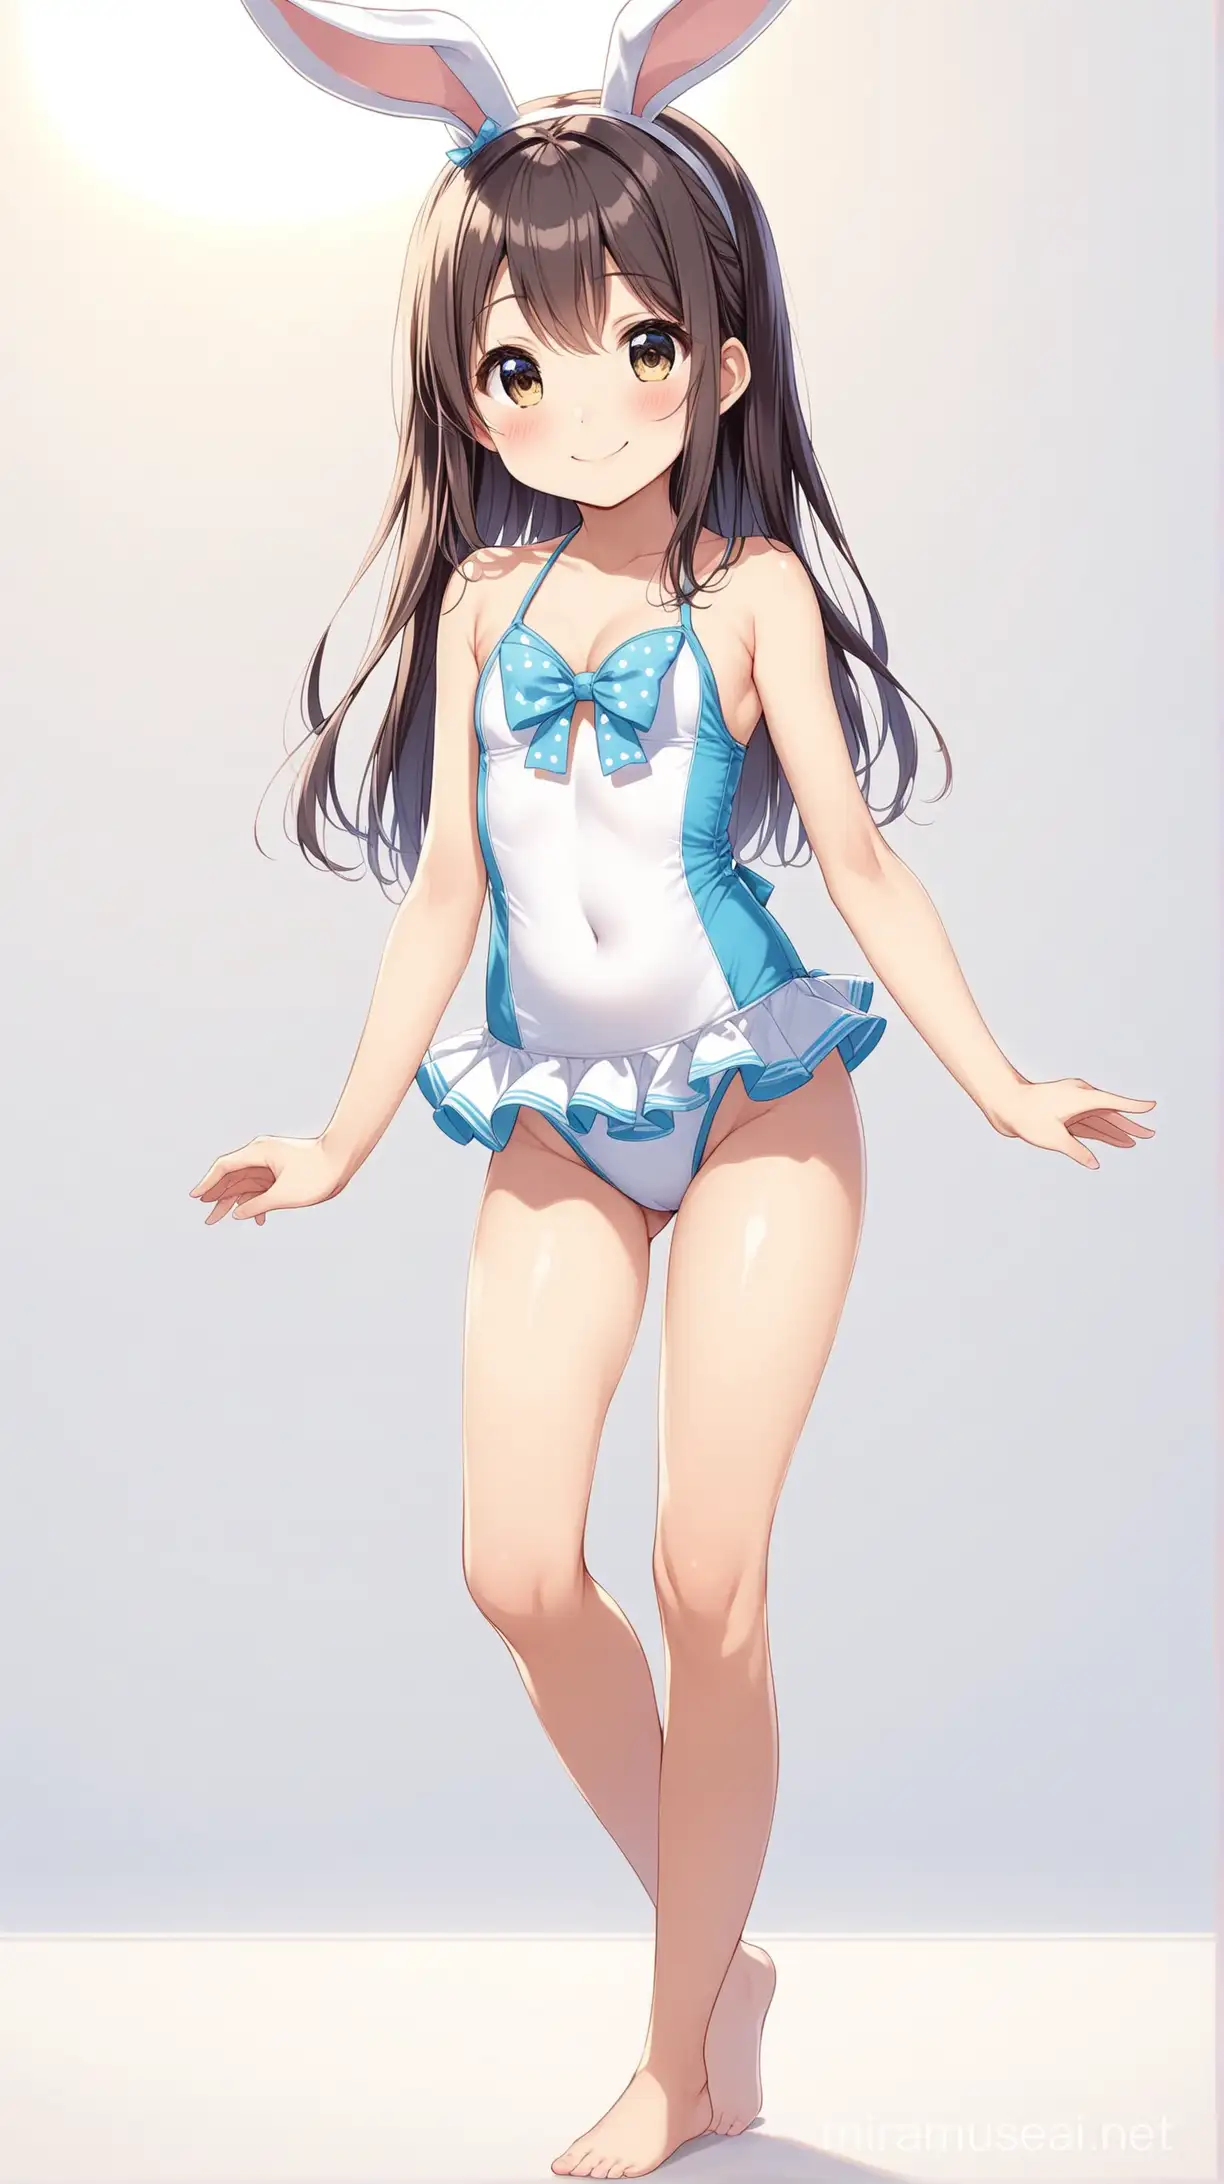 Kafuu Chino from Is The Order a Rabbit Posing in Cute Swimsuit on White Background